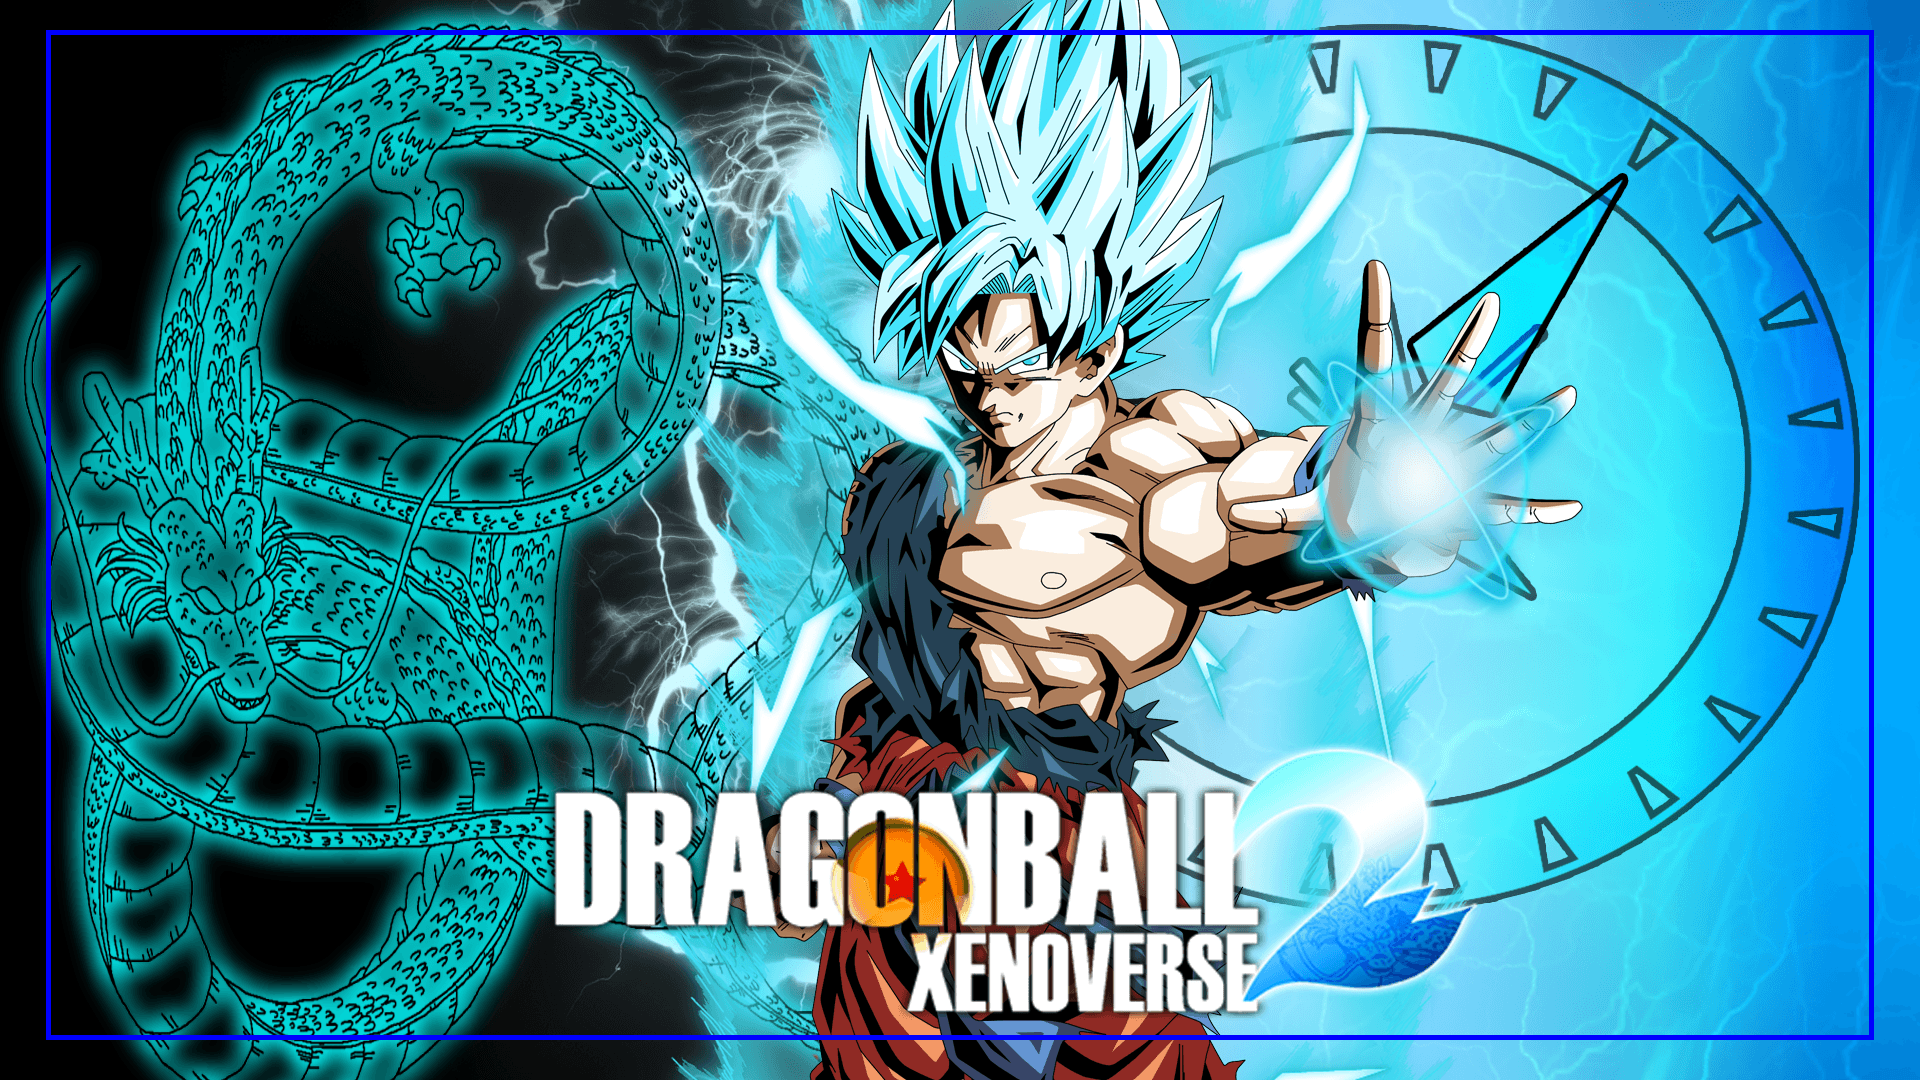 Xenoverse 2? Who can't wait for DBXenoverse 2 to come out already? I